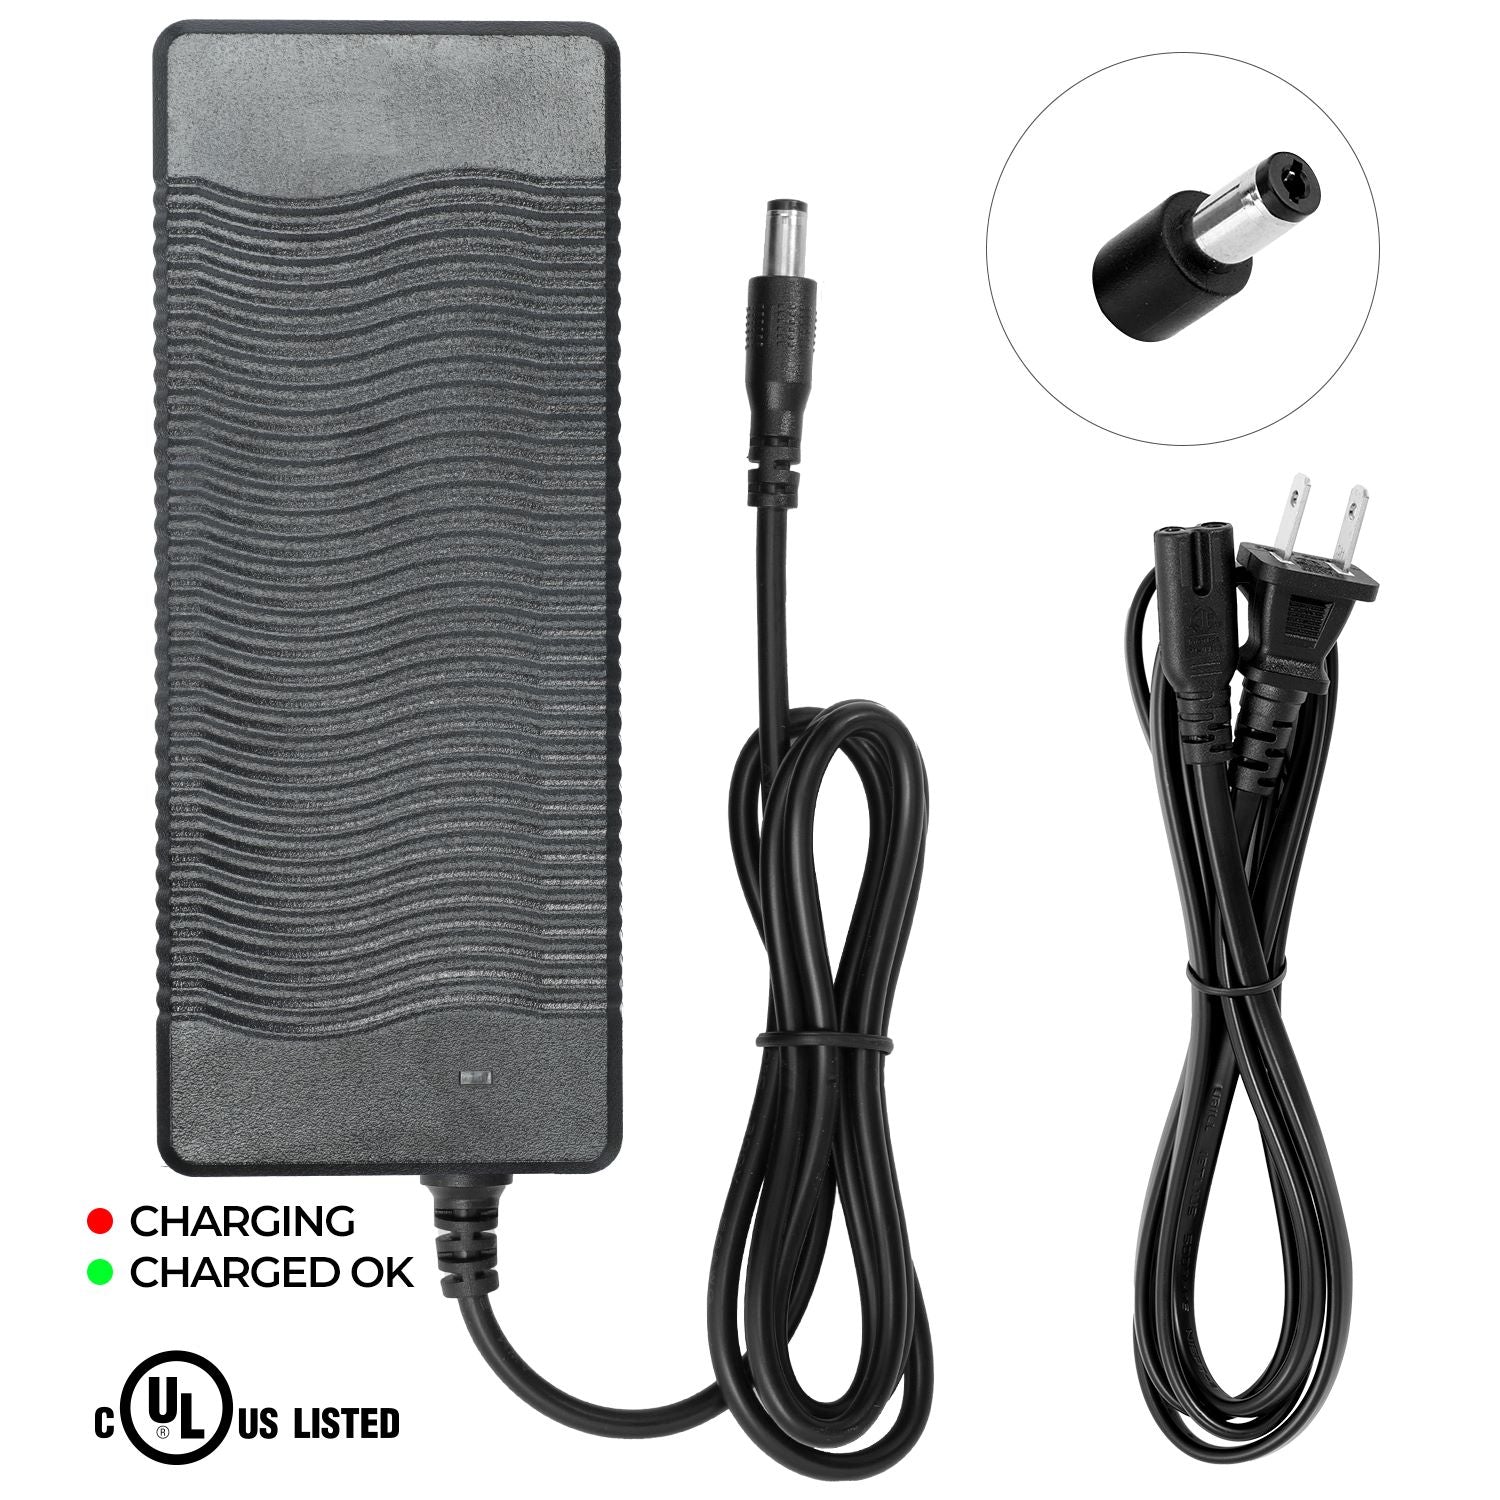 Charger for Magnum Mi6 eBike